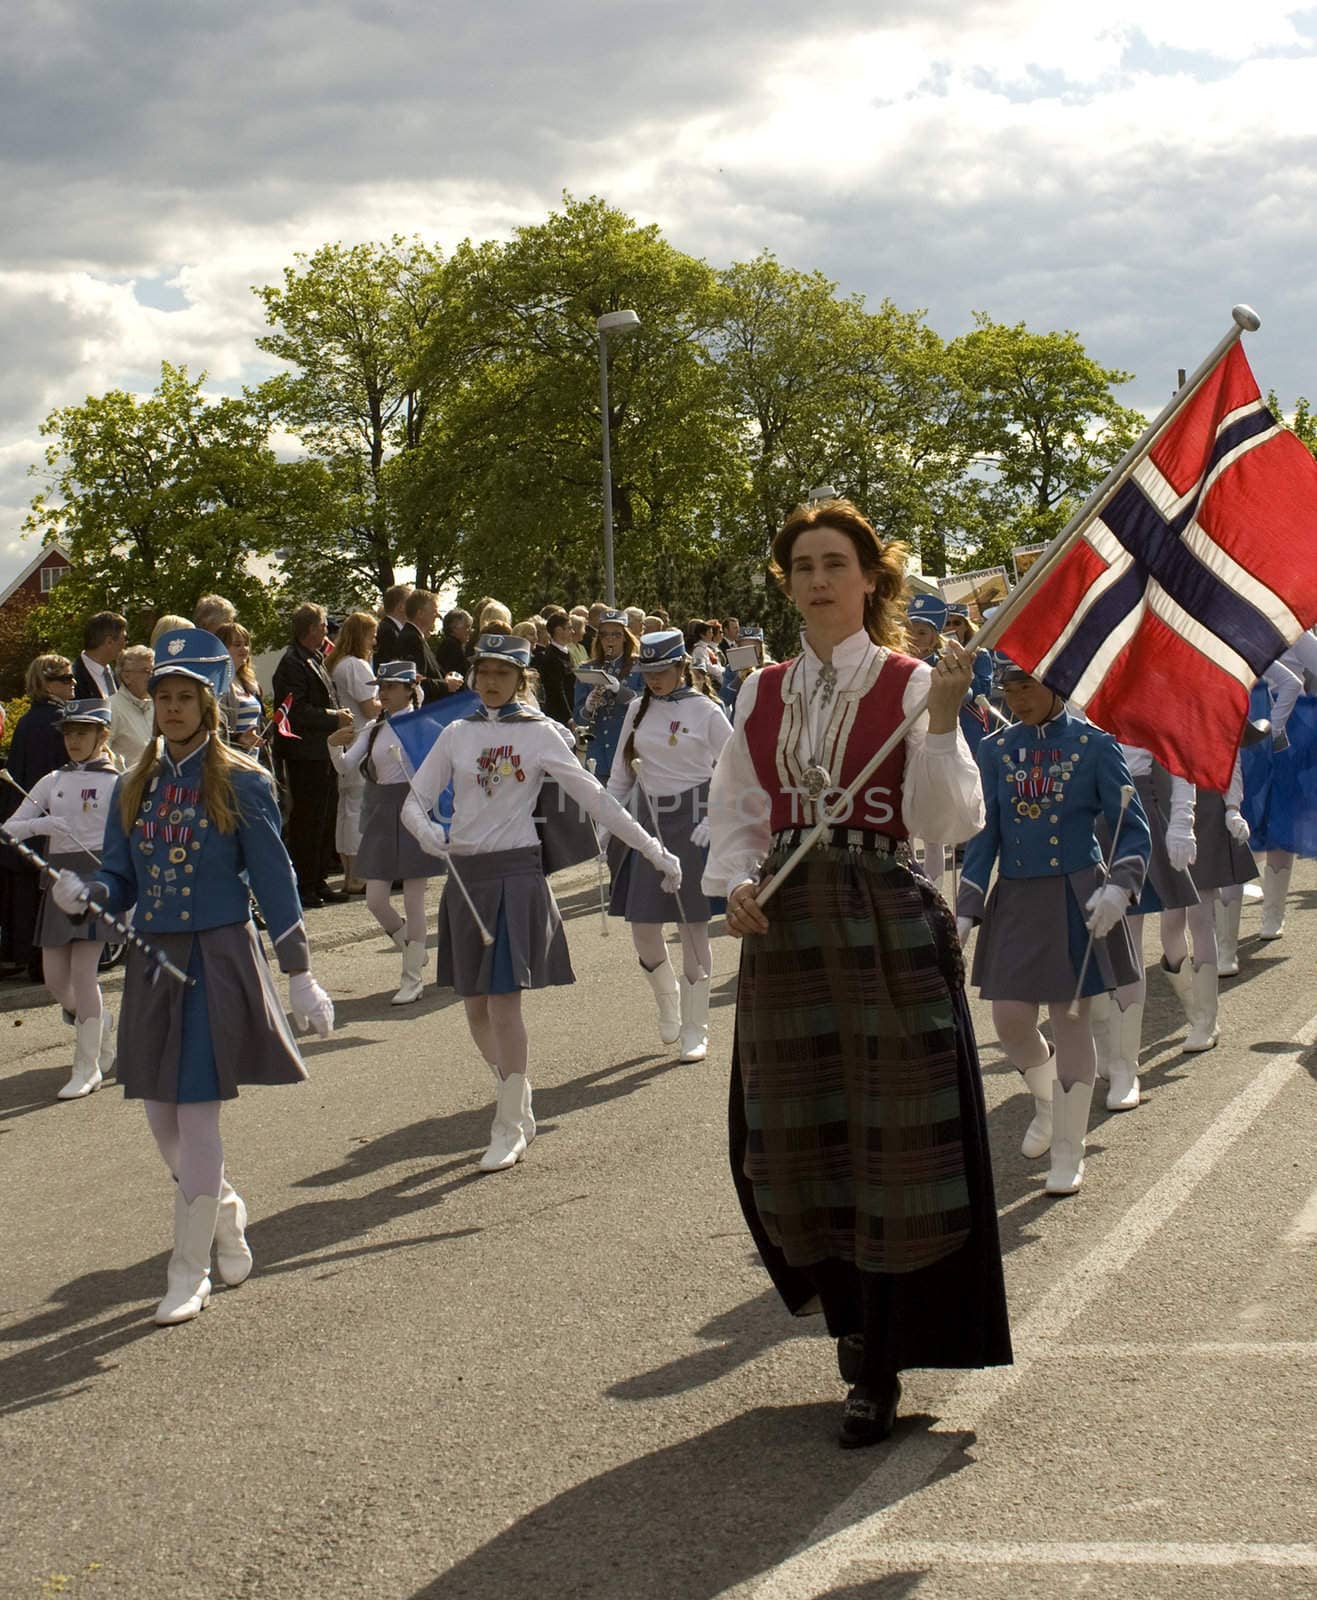 Parade on the Norwegian independence day, the 17th of May. The flag carrier is wearing a national costume from the Kristiansund region. 